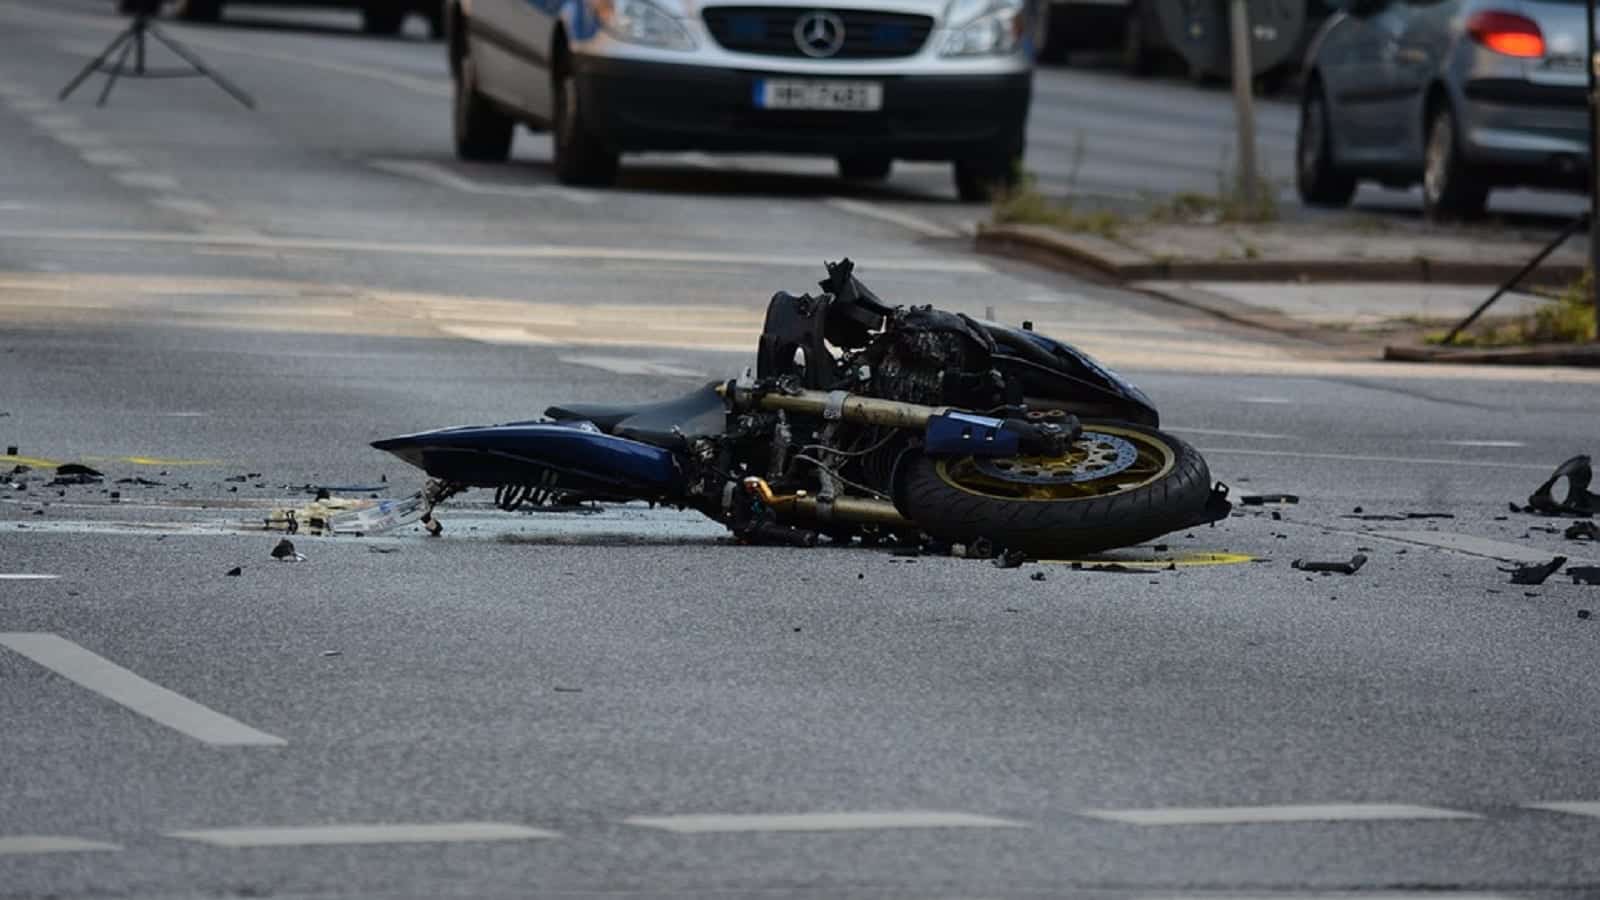 Crashed Motorcycle Laying In The Street Stock Photo